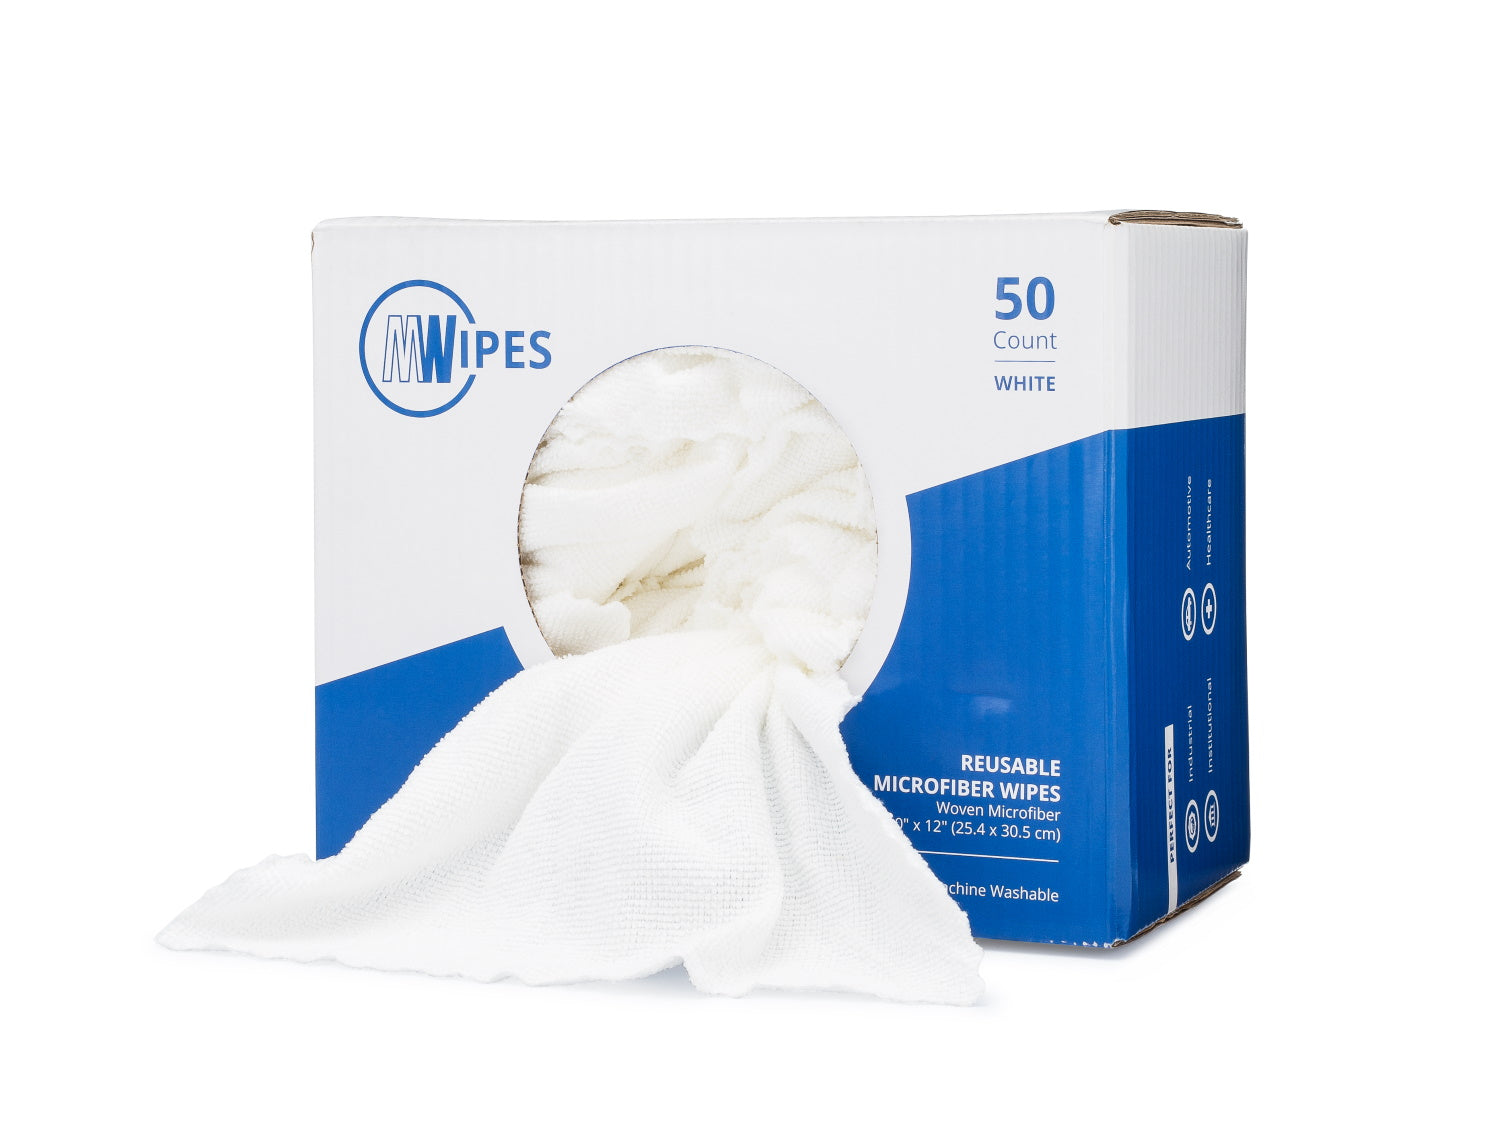 Hands DIY Disposable Cleaning Towels Reusable Cleaning Cloth Handy Cleaning Wipes Washable Kitchen Paper Towels Dish Rags Multi Use Wiping Rag